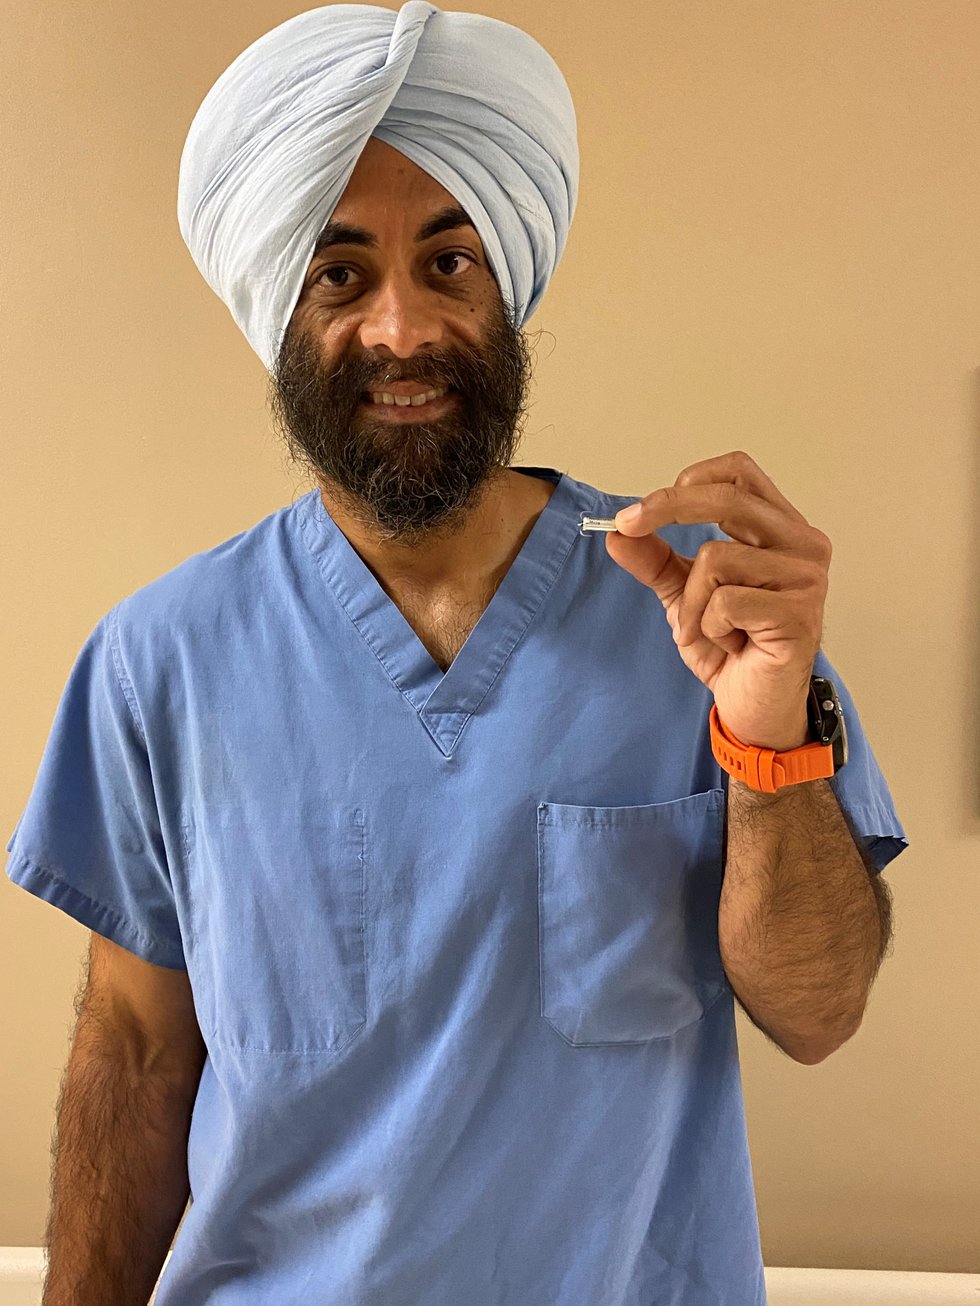 Dr. Harpreet Grewal with the Micra AV device